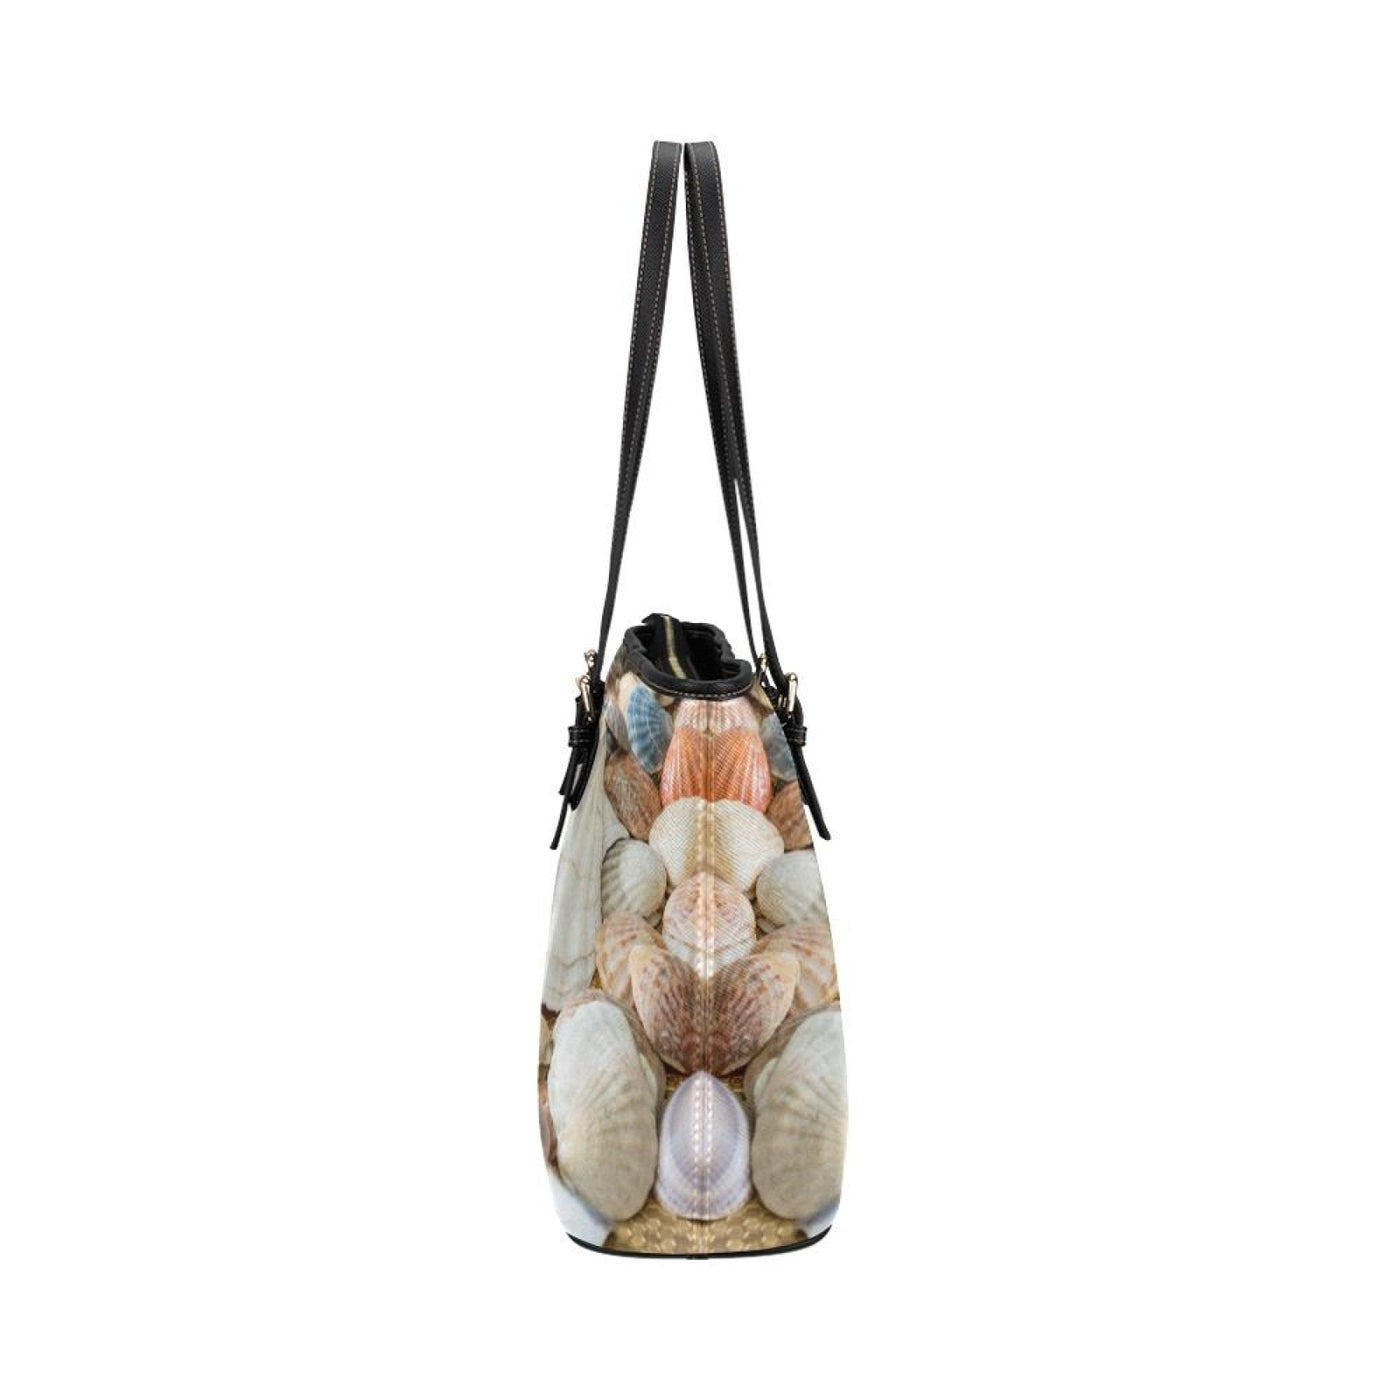 Large Leather Tote Shoulder Bag - Clam Sea Life B4130898 - Bags | Leather Tote